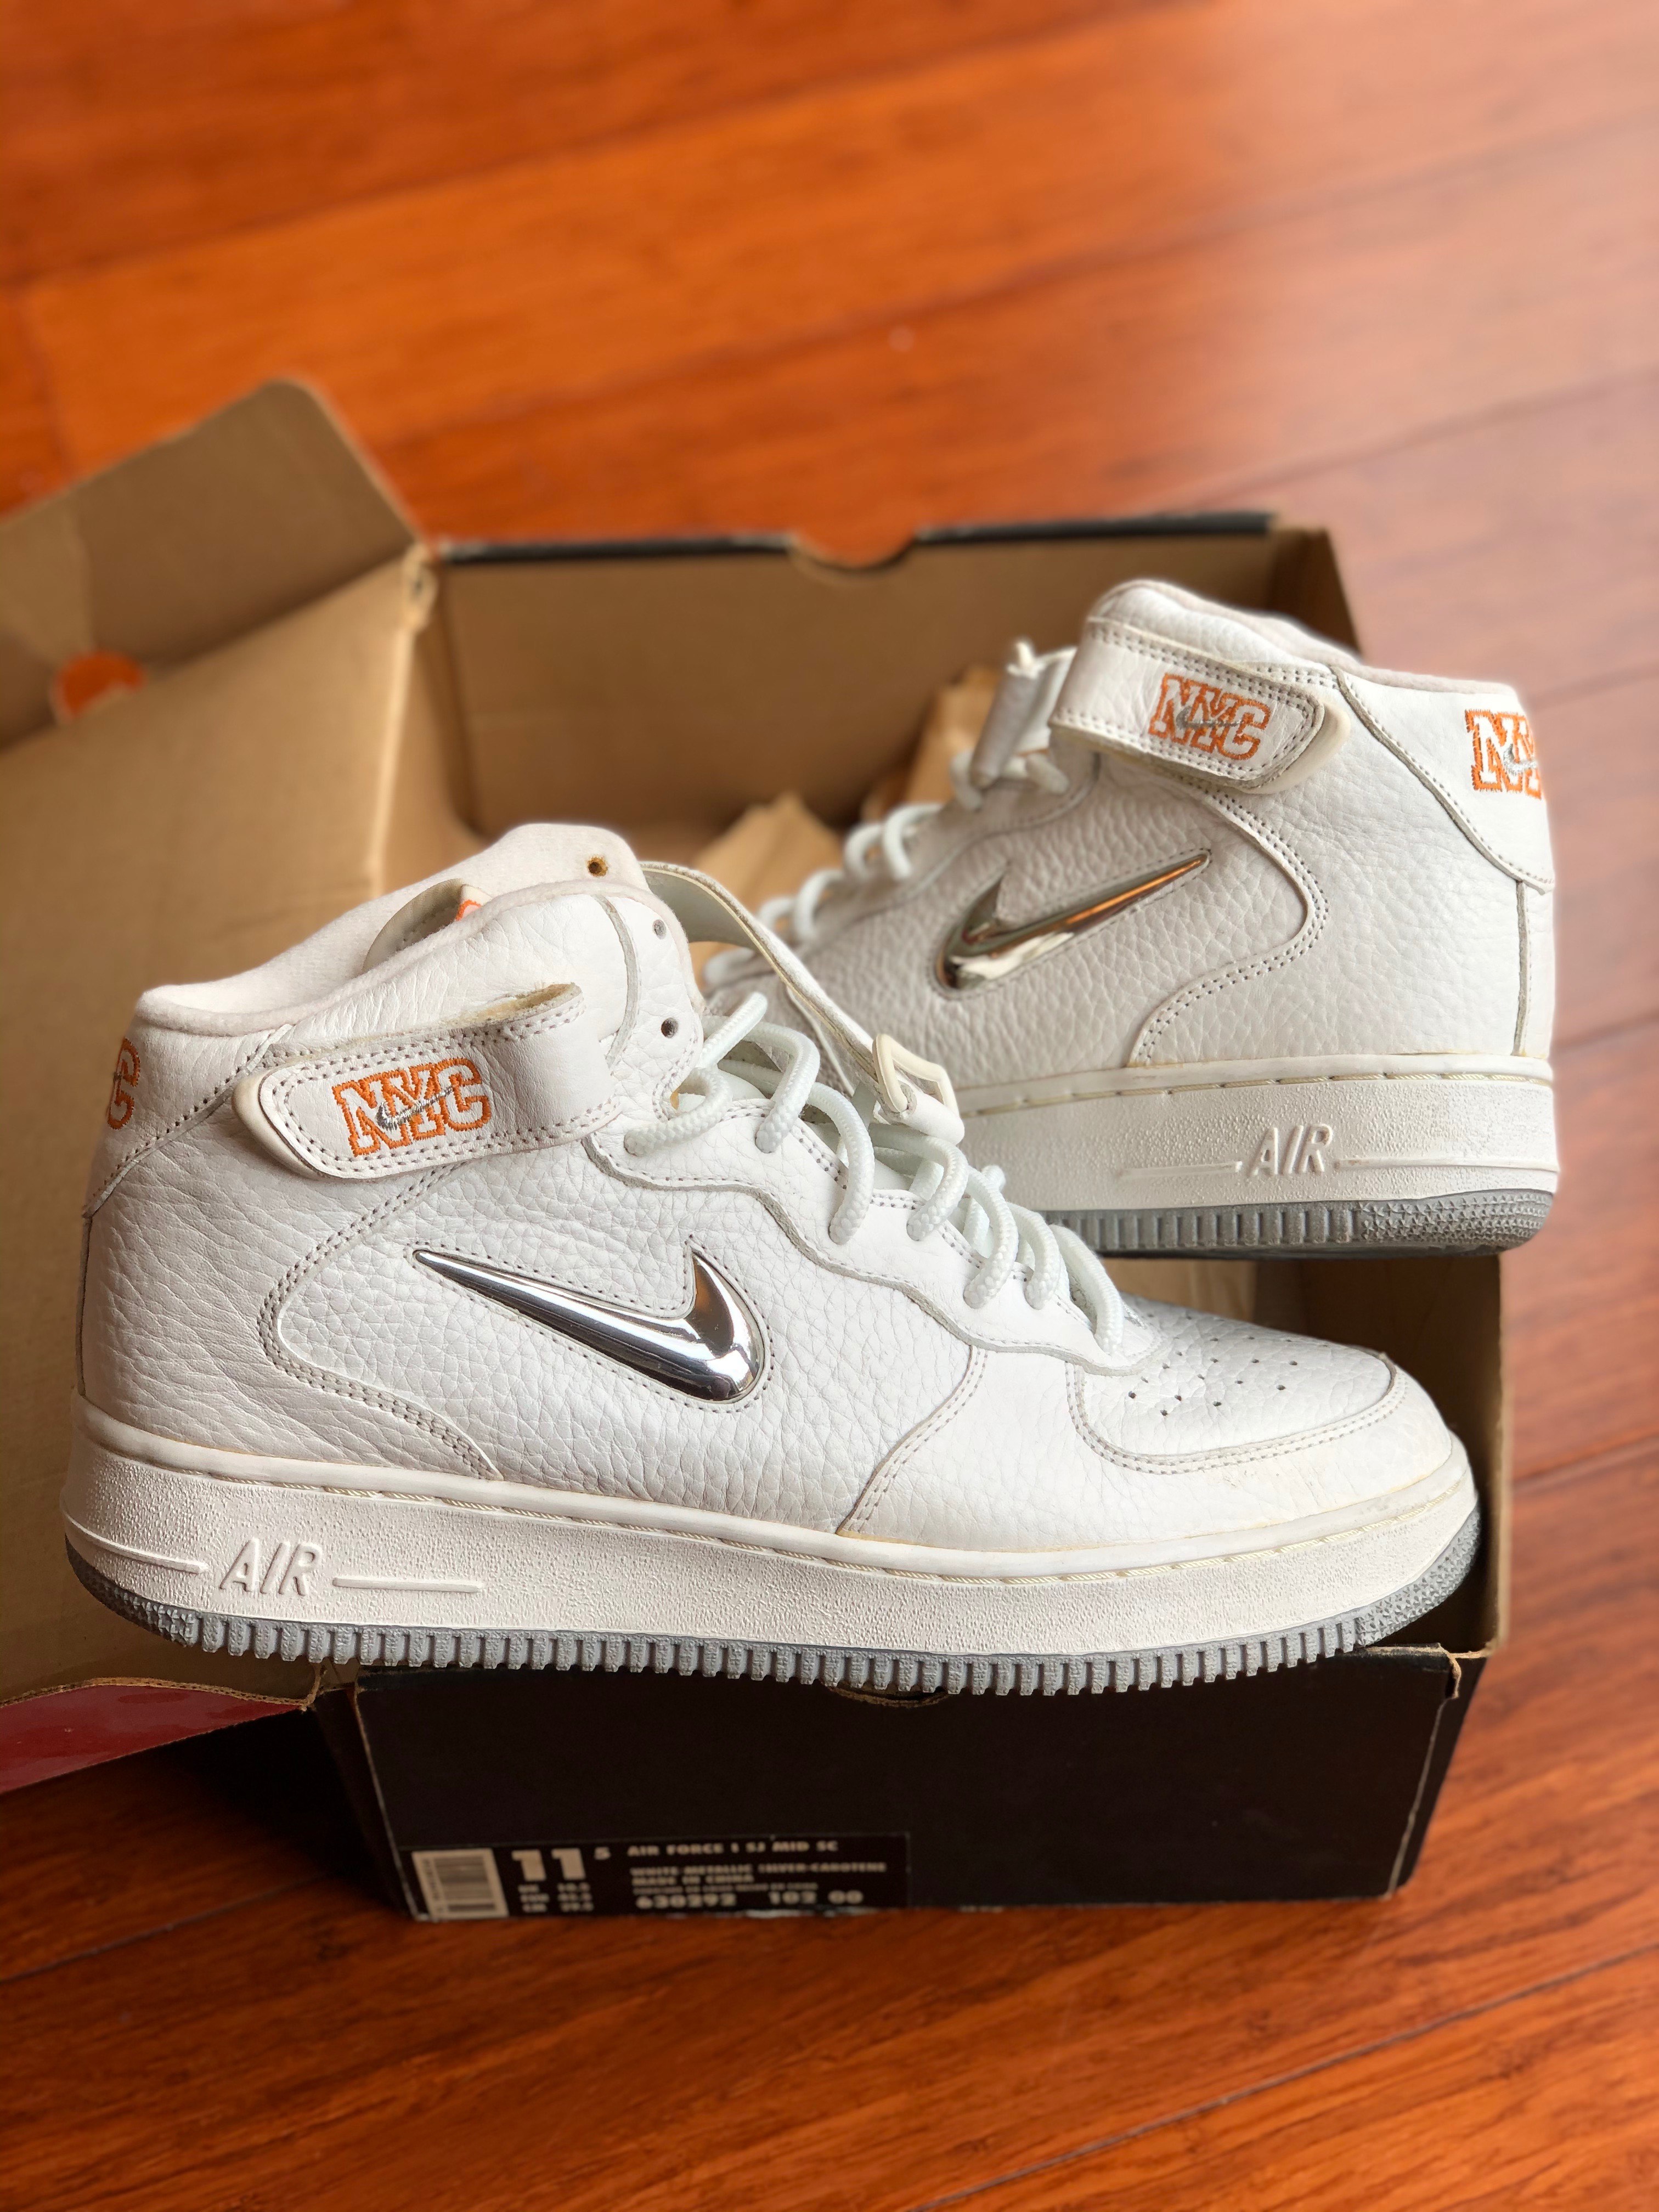 The Nike Air Force 1, a history lesson 